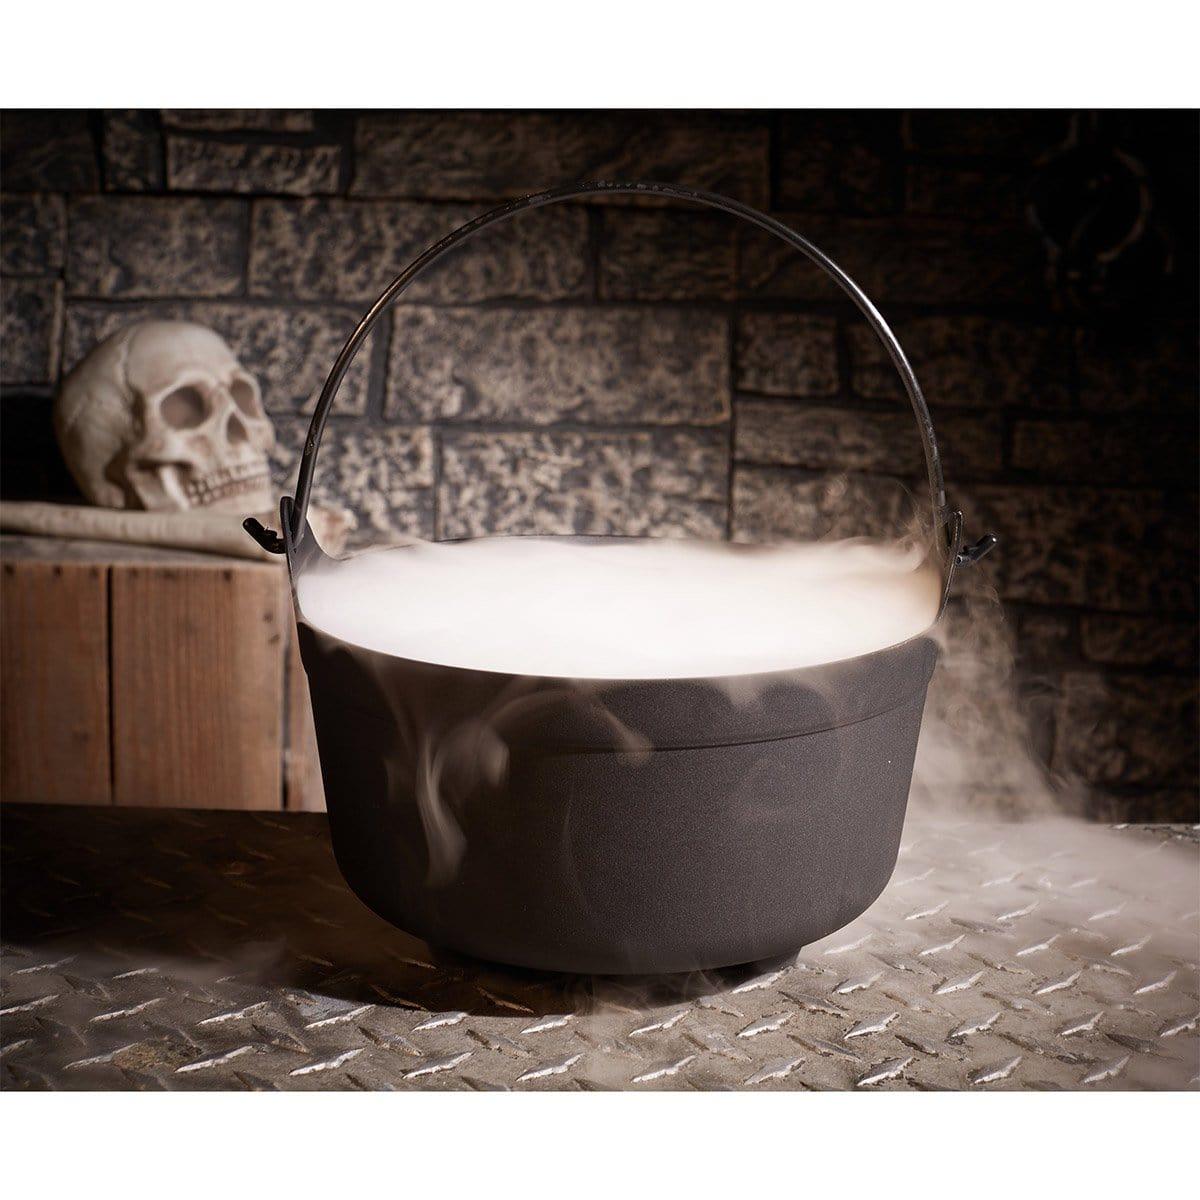 Buy Halloween Realistic Cauldron, 9 inches sold at Party Expert